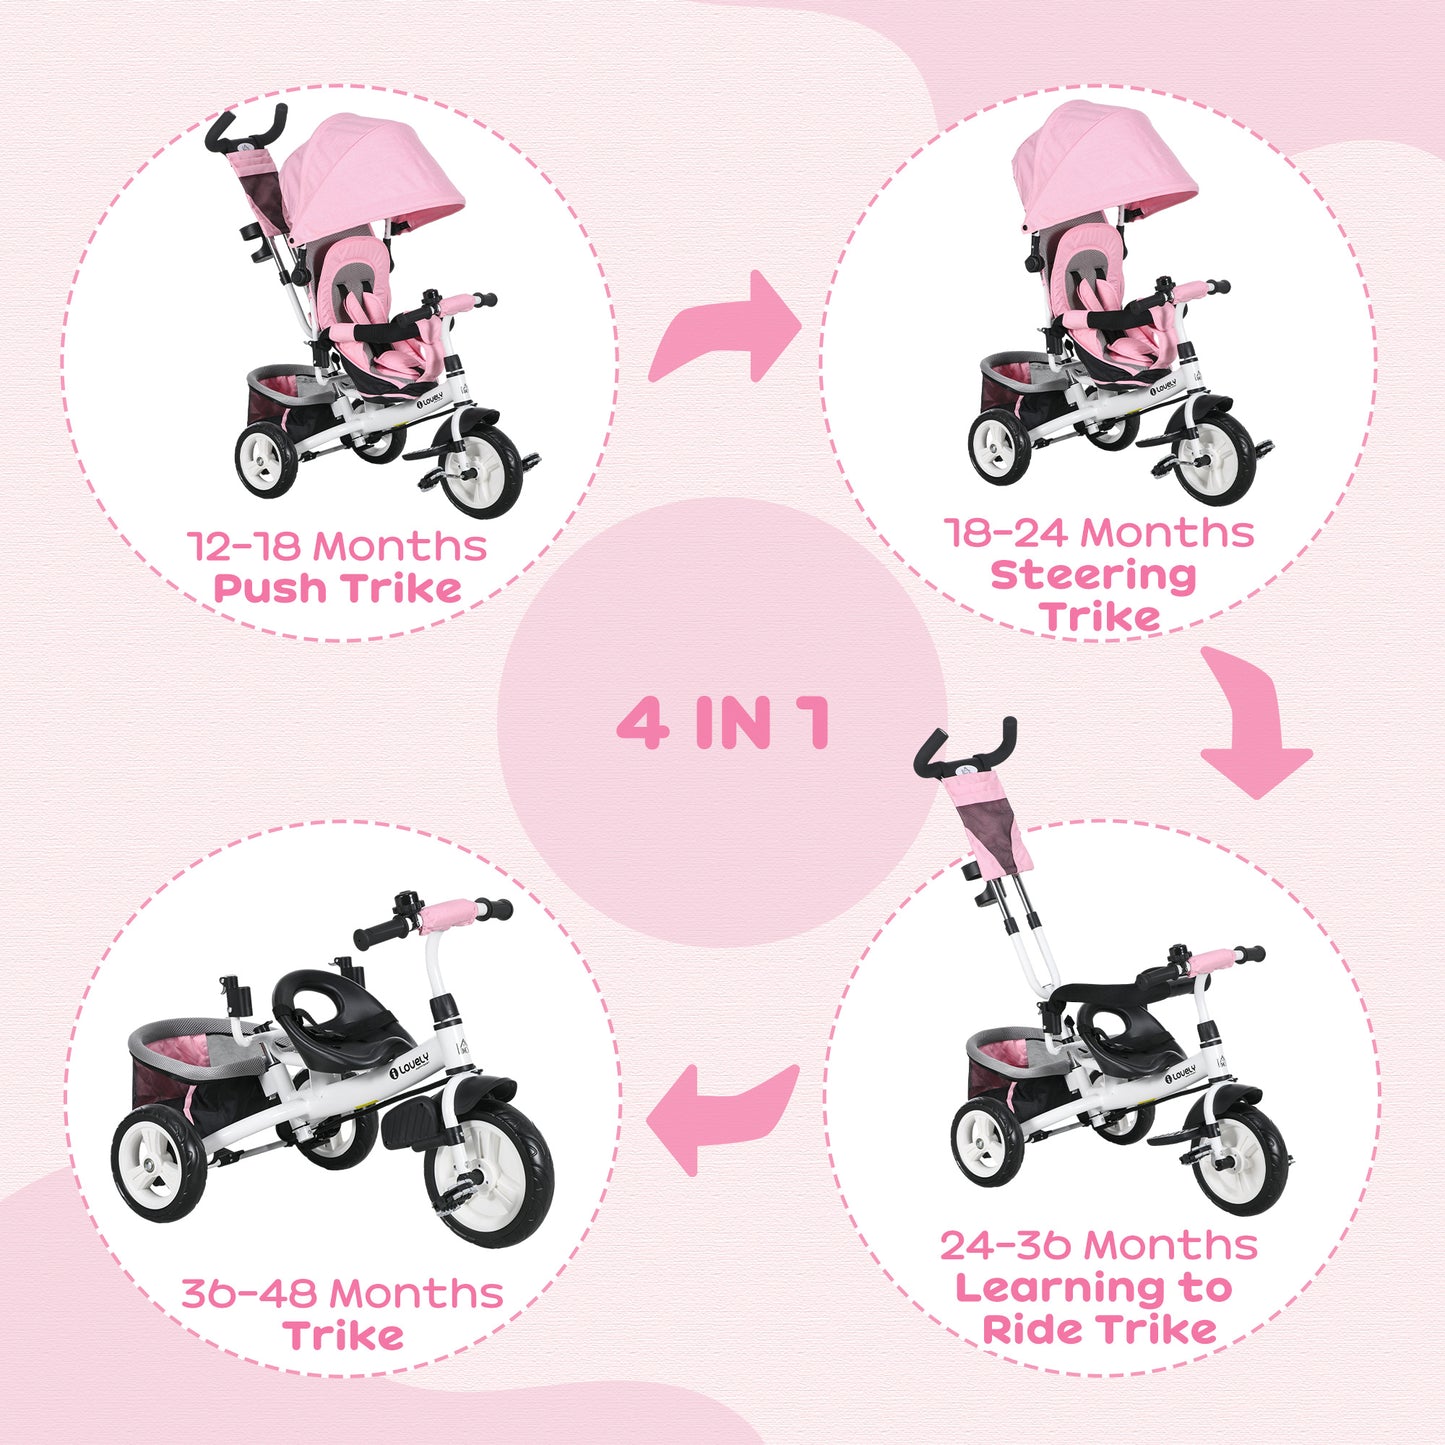 HOMCOM 4 in 1 Kids Trike Push Bike w/ Push Handle 5-point Safety Belt for 1-5 Year olds Pink